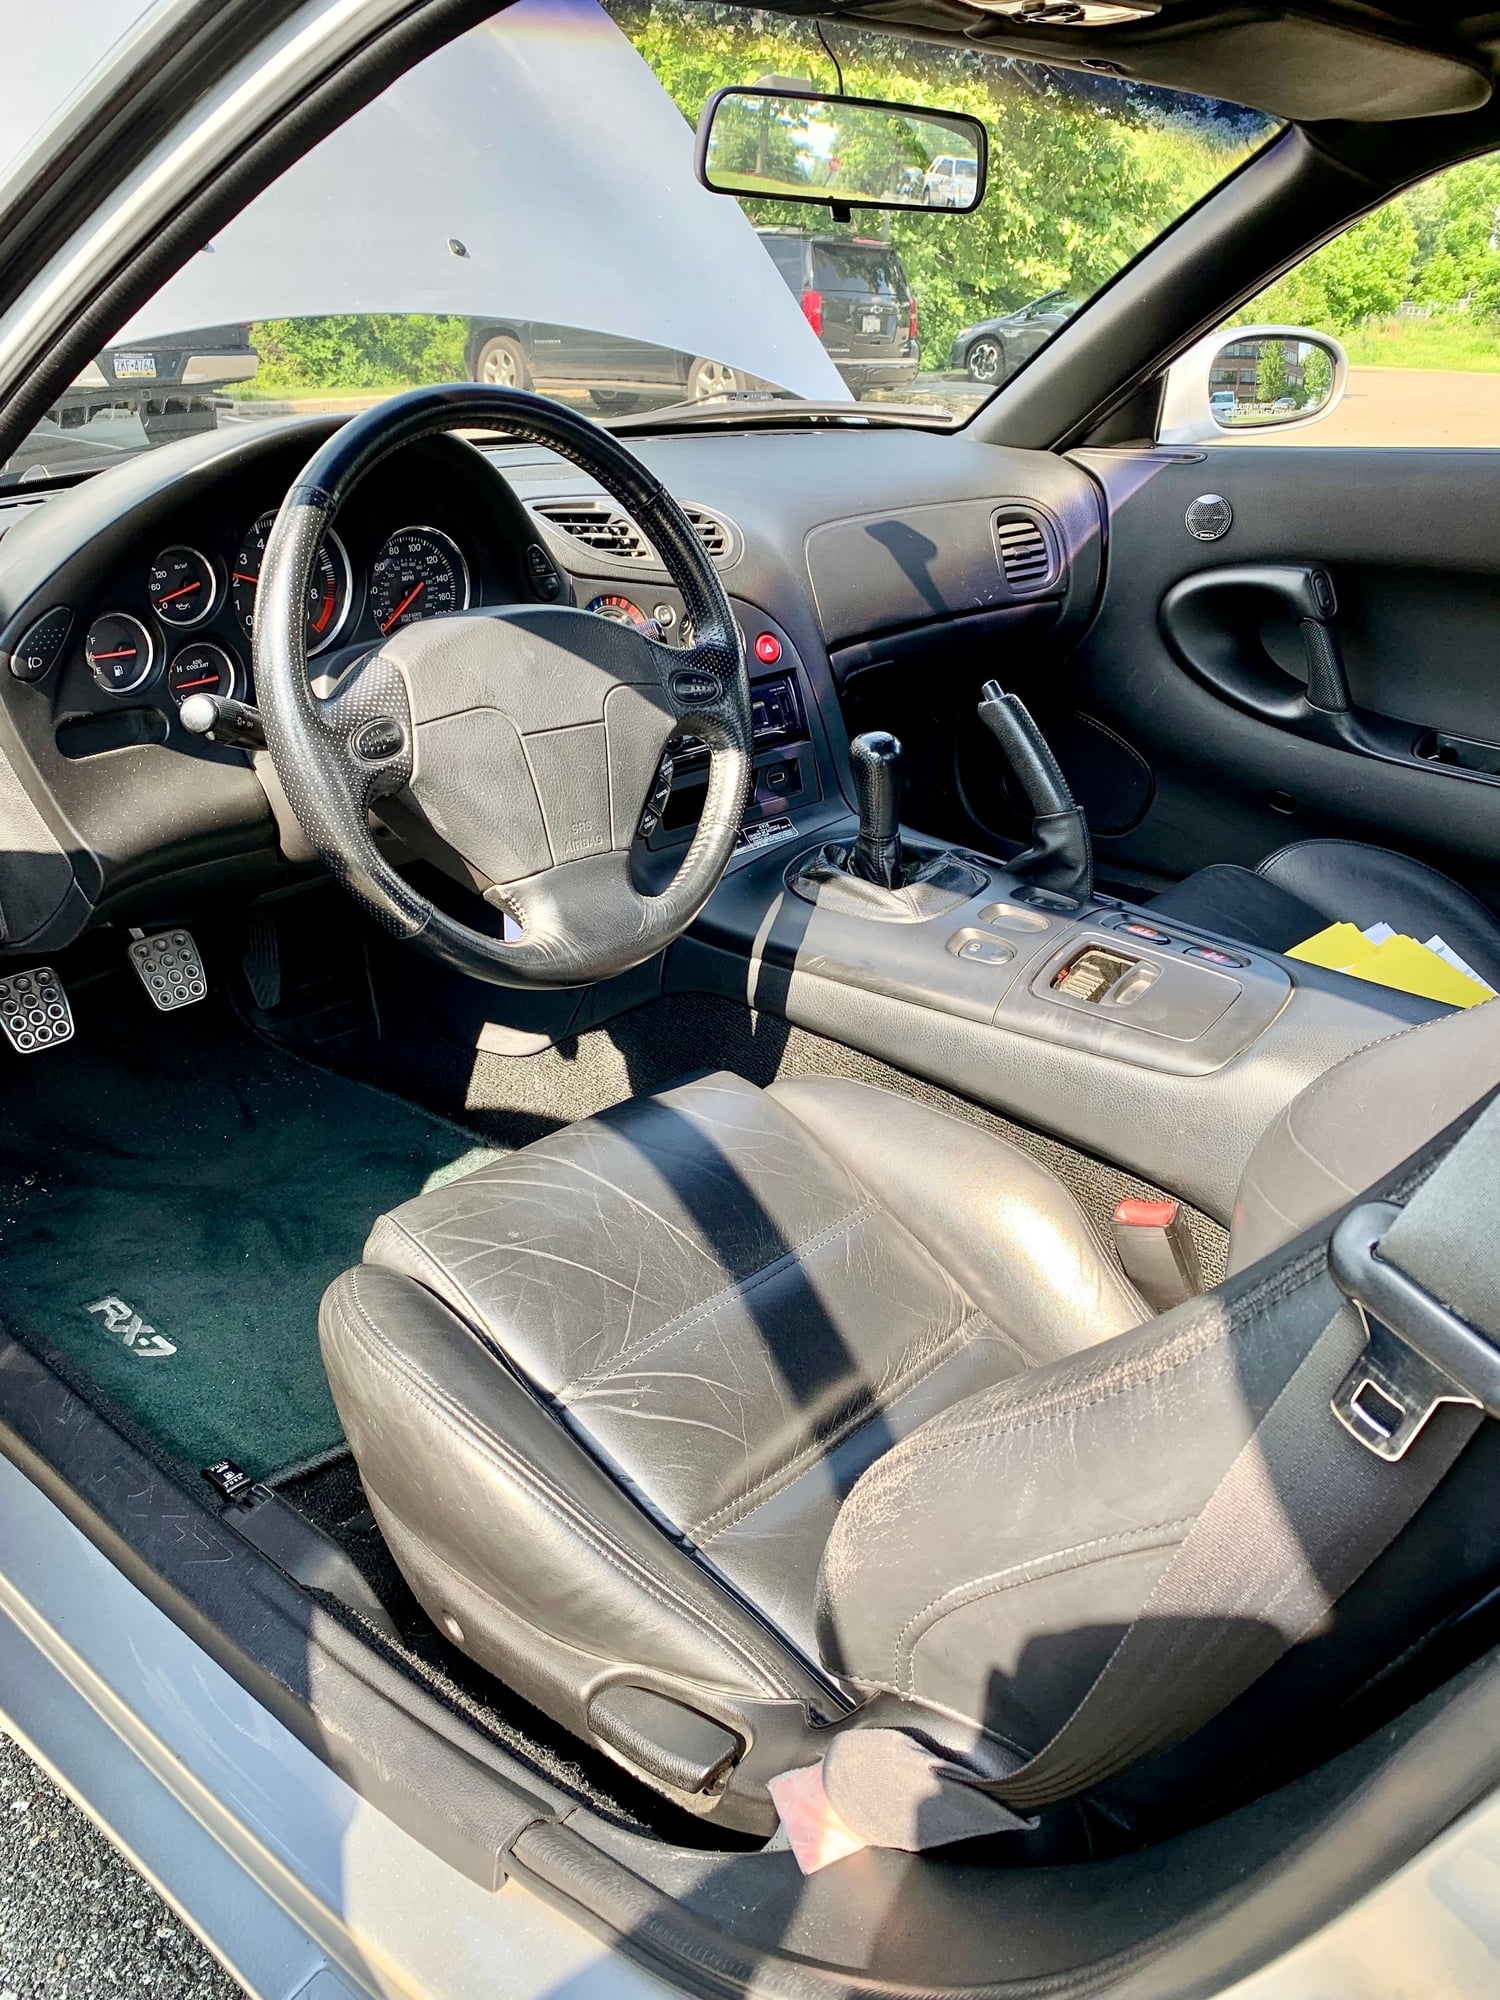 1993 Mazda RX-7 - 1993 SSM Touring 5-speed w/ 48,700 miles - Used - VIN JM1FD3311P0207768 - 48,700 Miles - Other - 2WD - Manual - Coupe - Silver - Breinigsville, PA 18031, United States